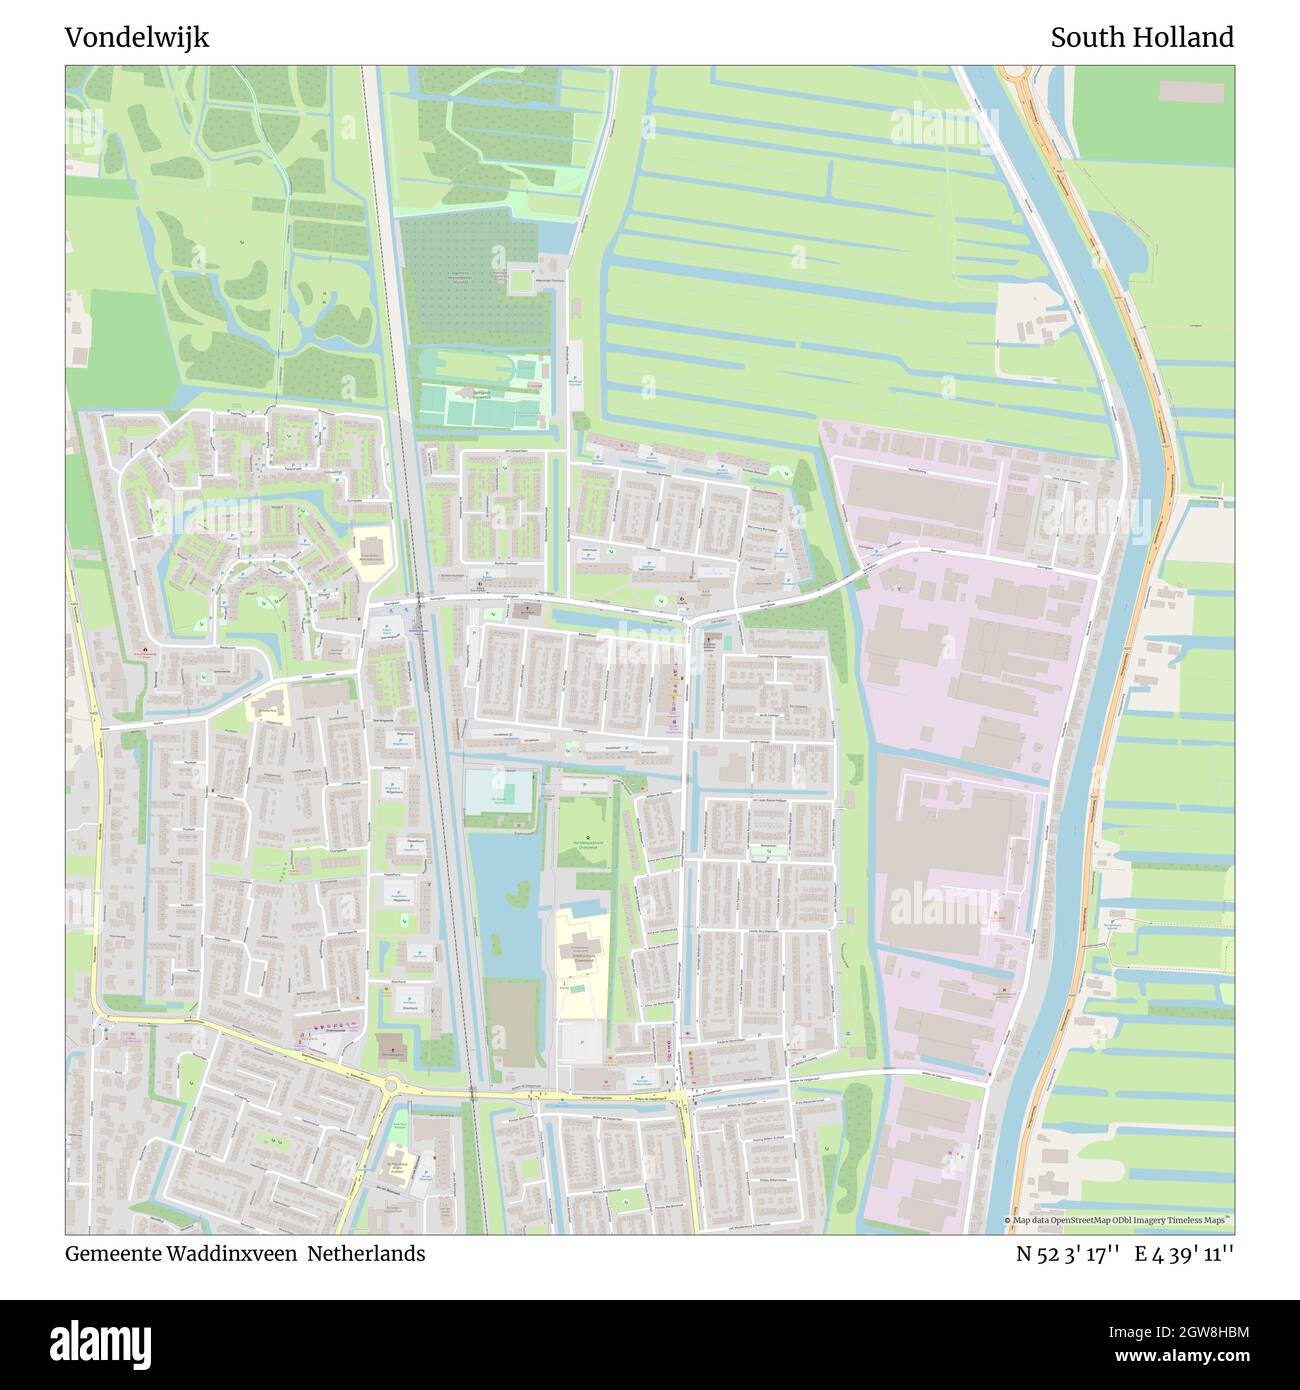 Vondelwijk, Gemeente Waddinxveen, Netherlands, South Holland, N 52 3' 17'', E 4 39' 11'', map, Timeless Map published in 2021. Travelers, explorers and adventurers like Florence Nightingale, David Livingstone, Ernest Shackleton, Lewis and Clark and Sherlock Holmes relied on maps to plan travels to the world's most remote corners, Timeless Maps is mapping most locations on the globe, showing the achievement of great dreams Stock Photo